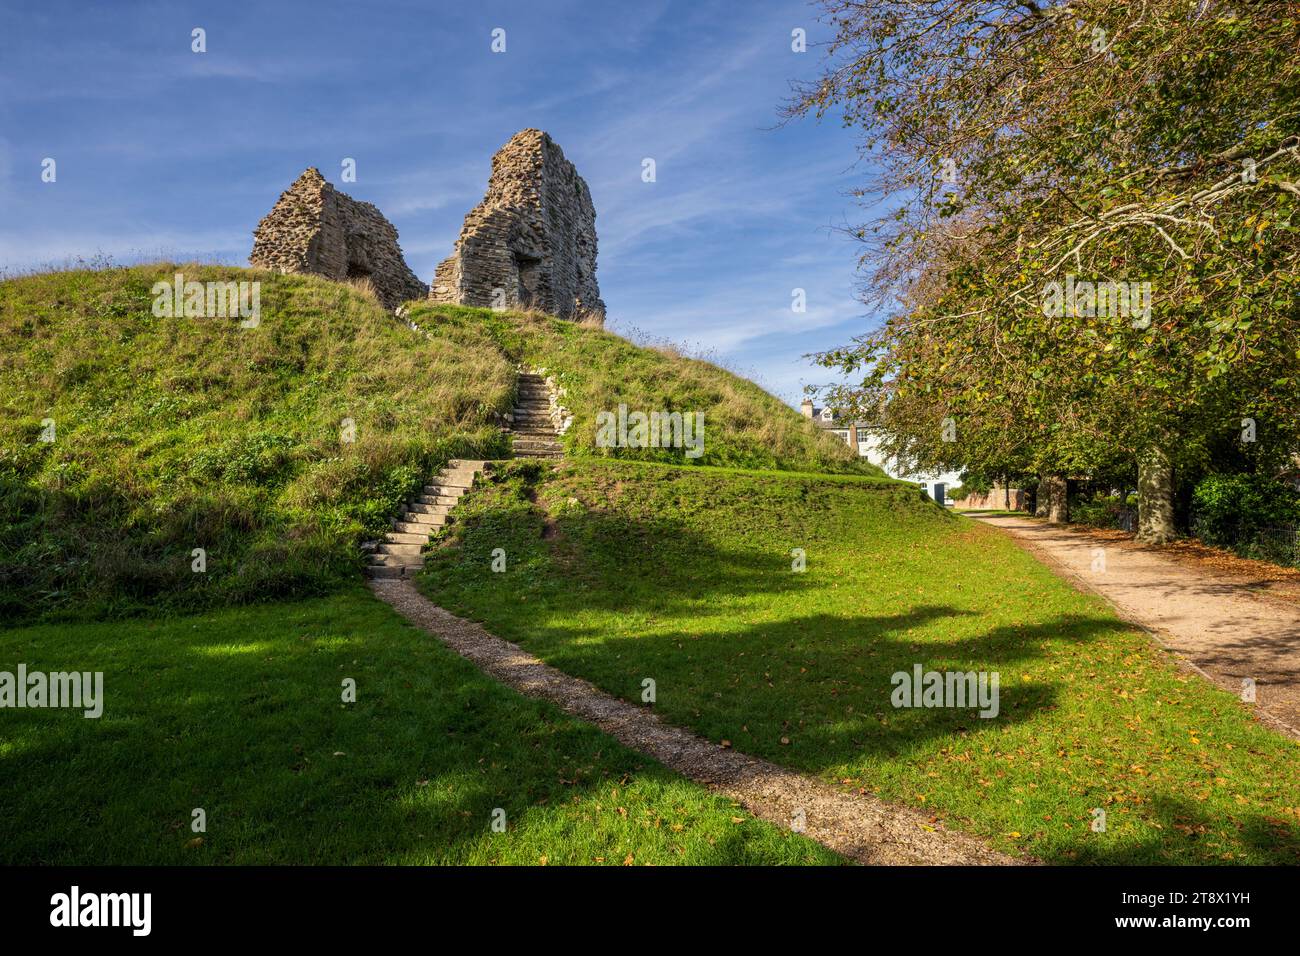 The motte-and-bailey Norman castle at Christchurch, Dorset, England Stock Photo